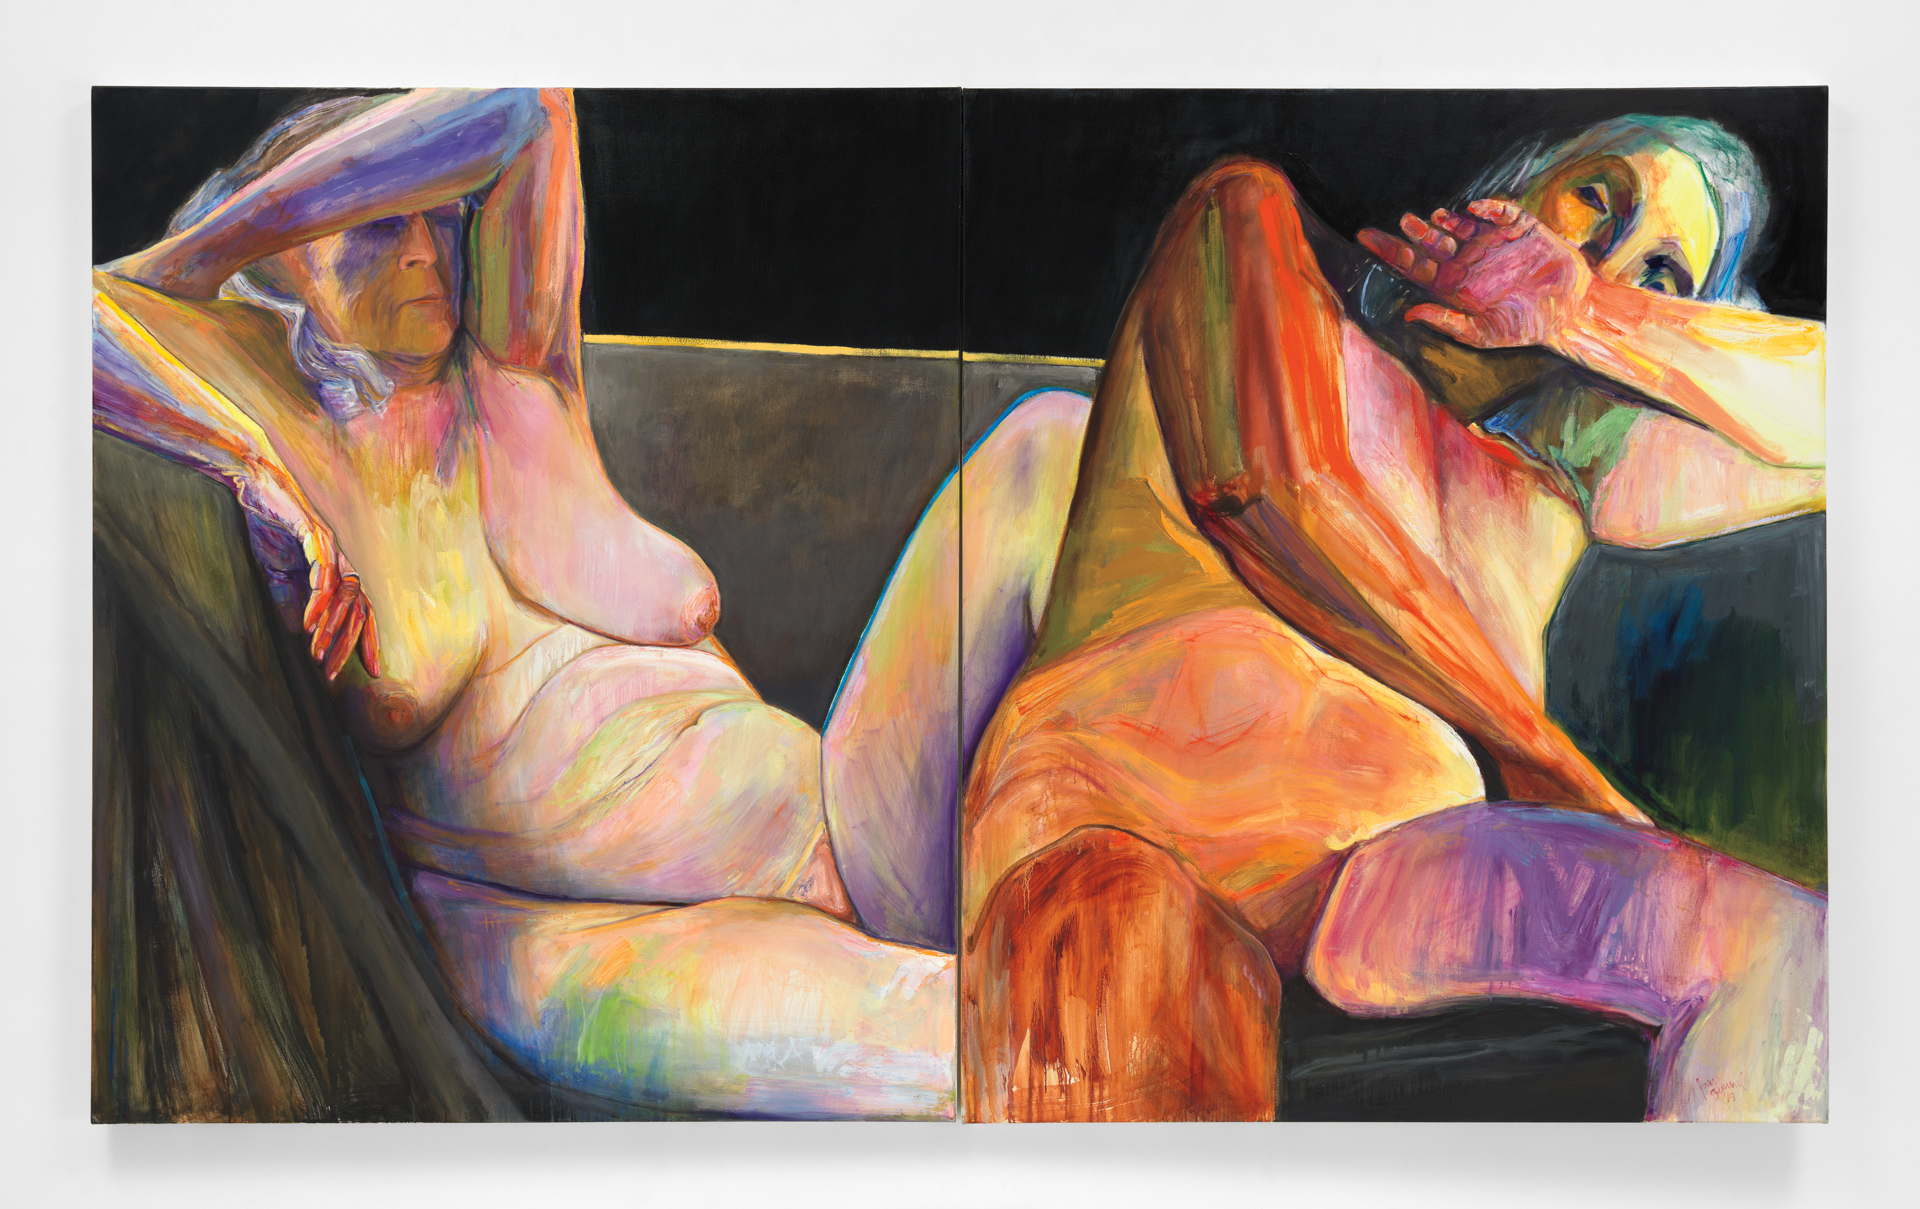 In a double self-portrait, two colorful older nude women sit on a couch. On the left, she reclines, and is rendered more realistically. On the right, she strikes a protective pose, with her arm covering her face, and is rendered more expressively.